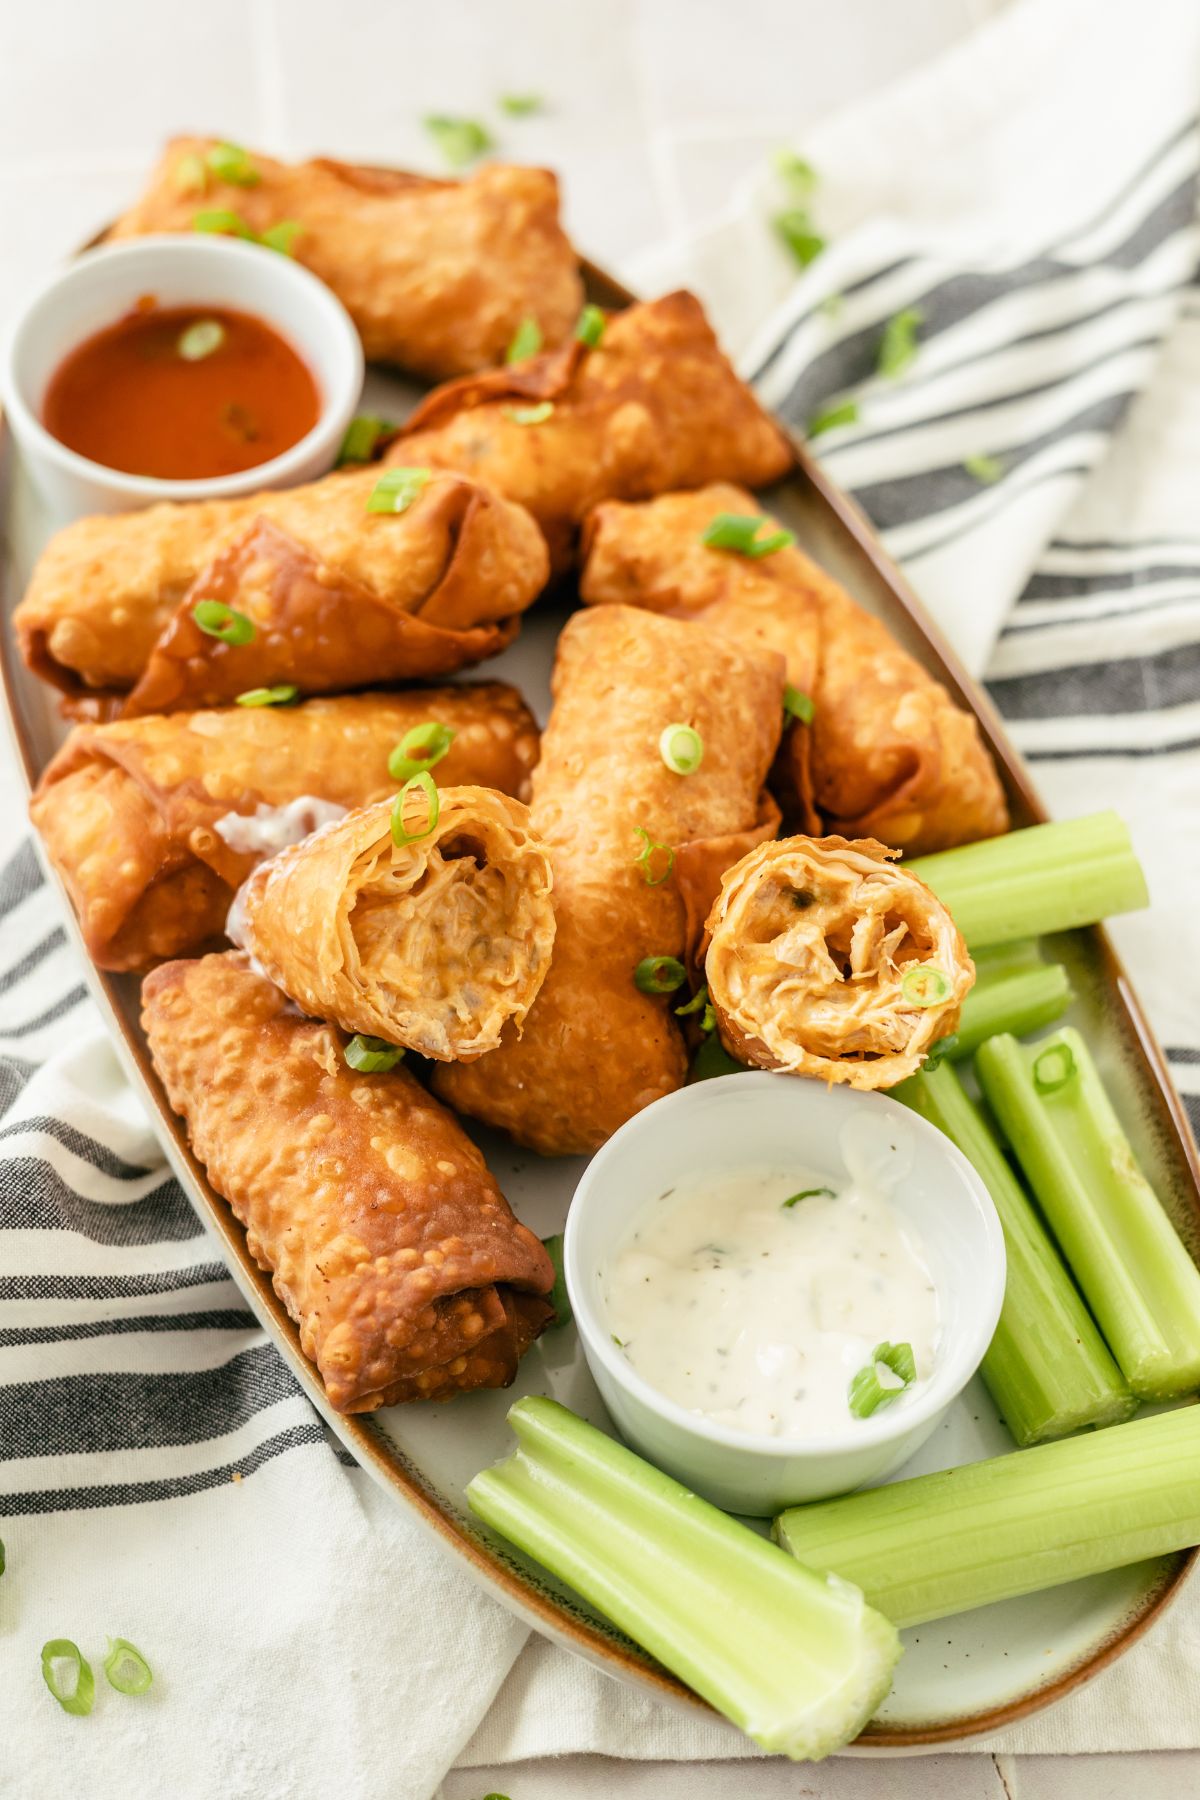 Savory Buffalo Chicken Egg Rolls accompanied by zesty dips and crisp celery sticks for a delicious and satisfying snack